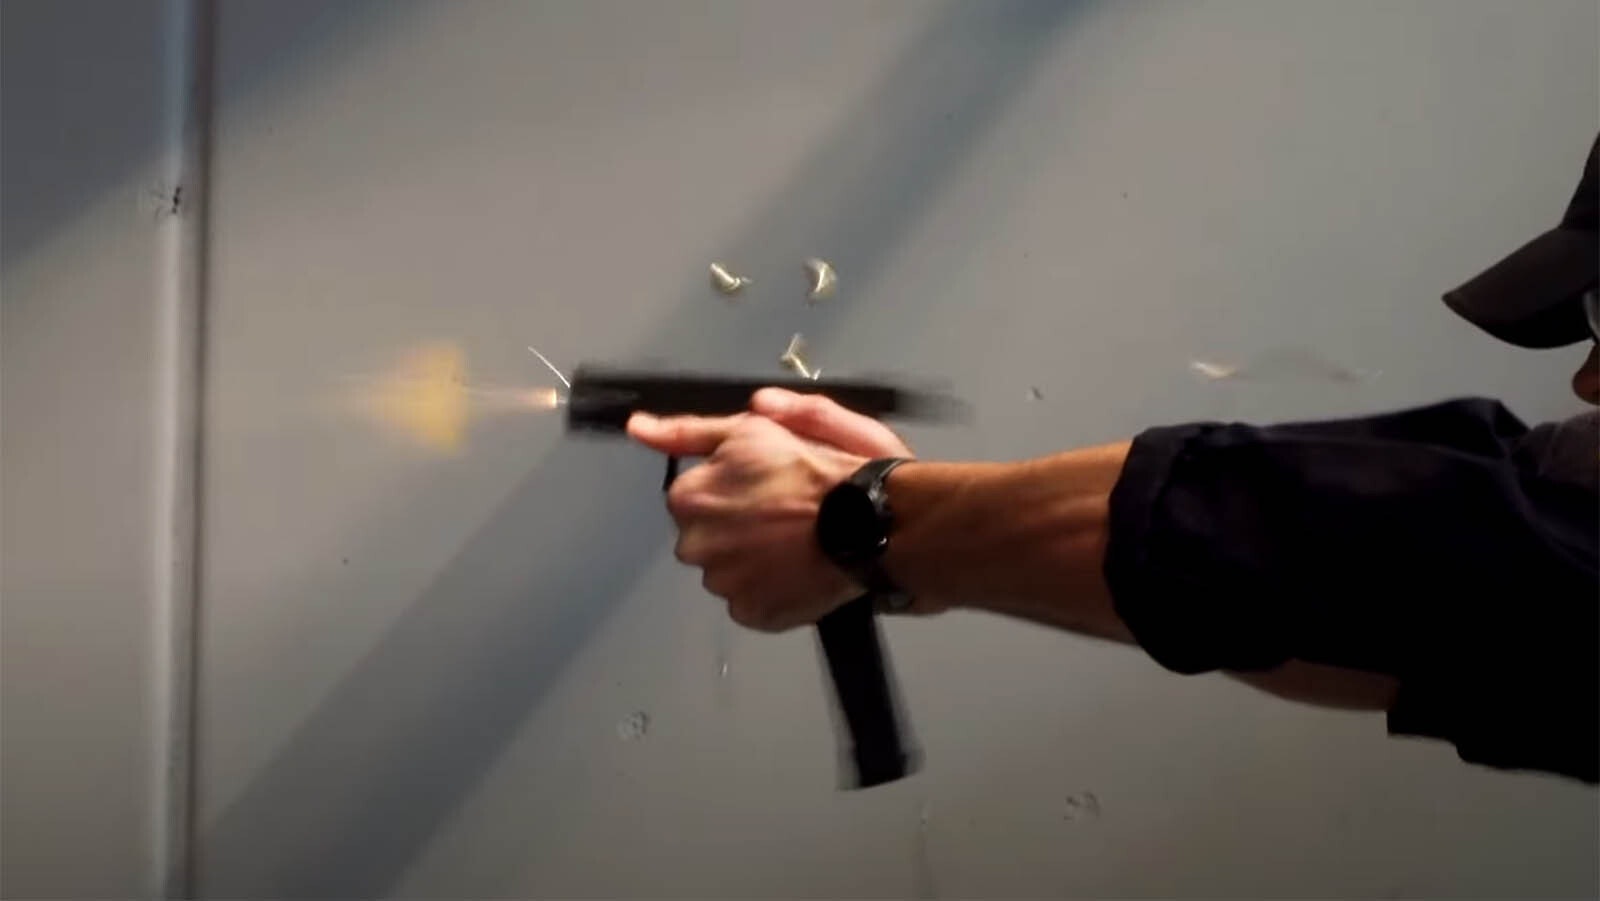 ATF agent demonstrates firing a Glock pistol with a switch attached to make it full-auto in this video posted by WTHR in Indianapolis, Indiana.